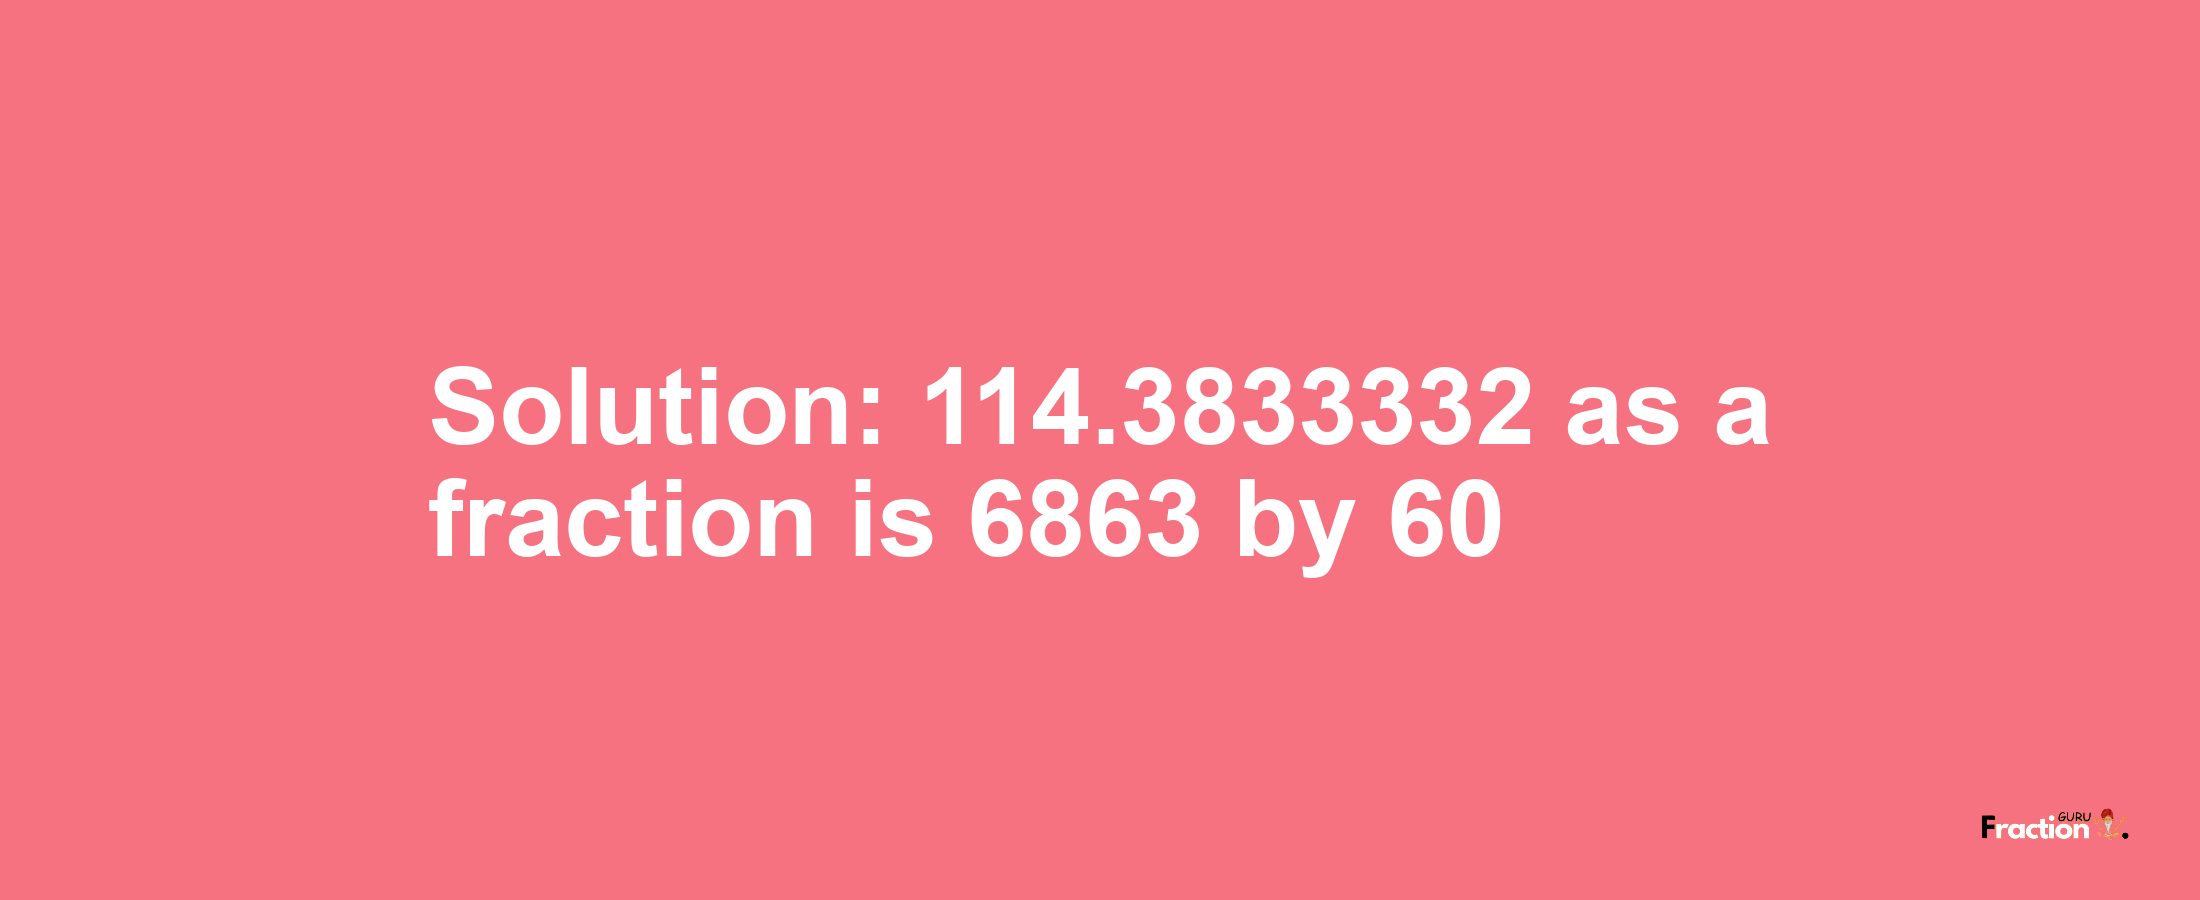 Solution:114.3833332 as a fraction is 6863/60